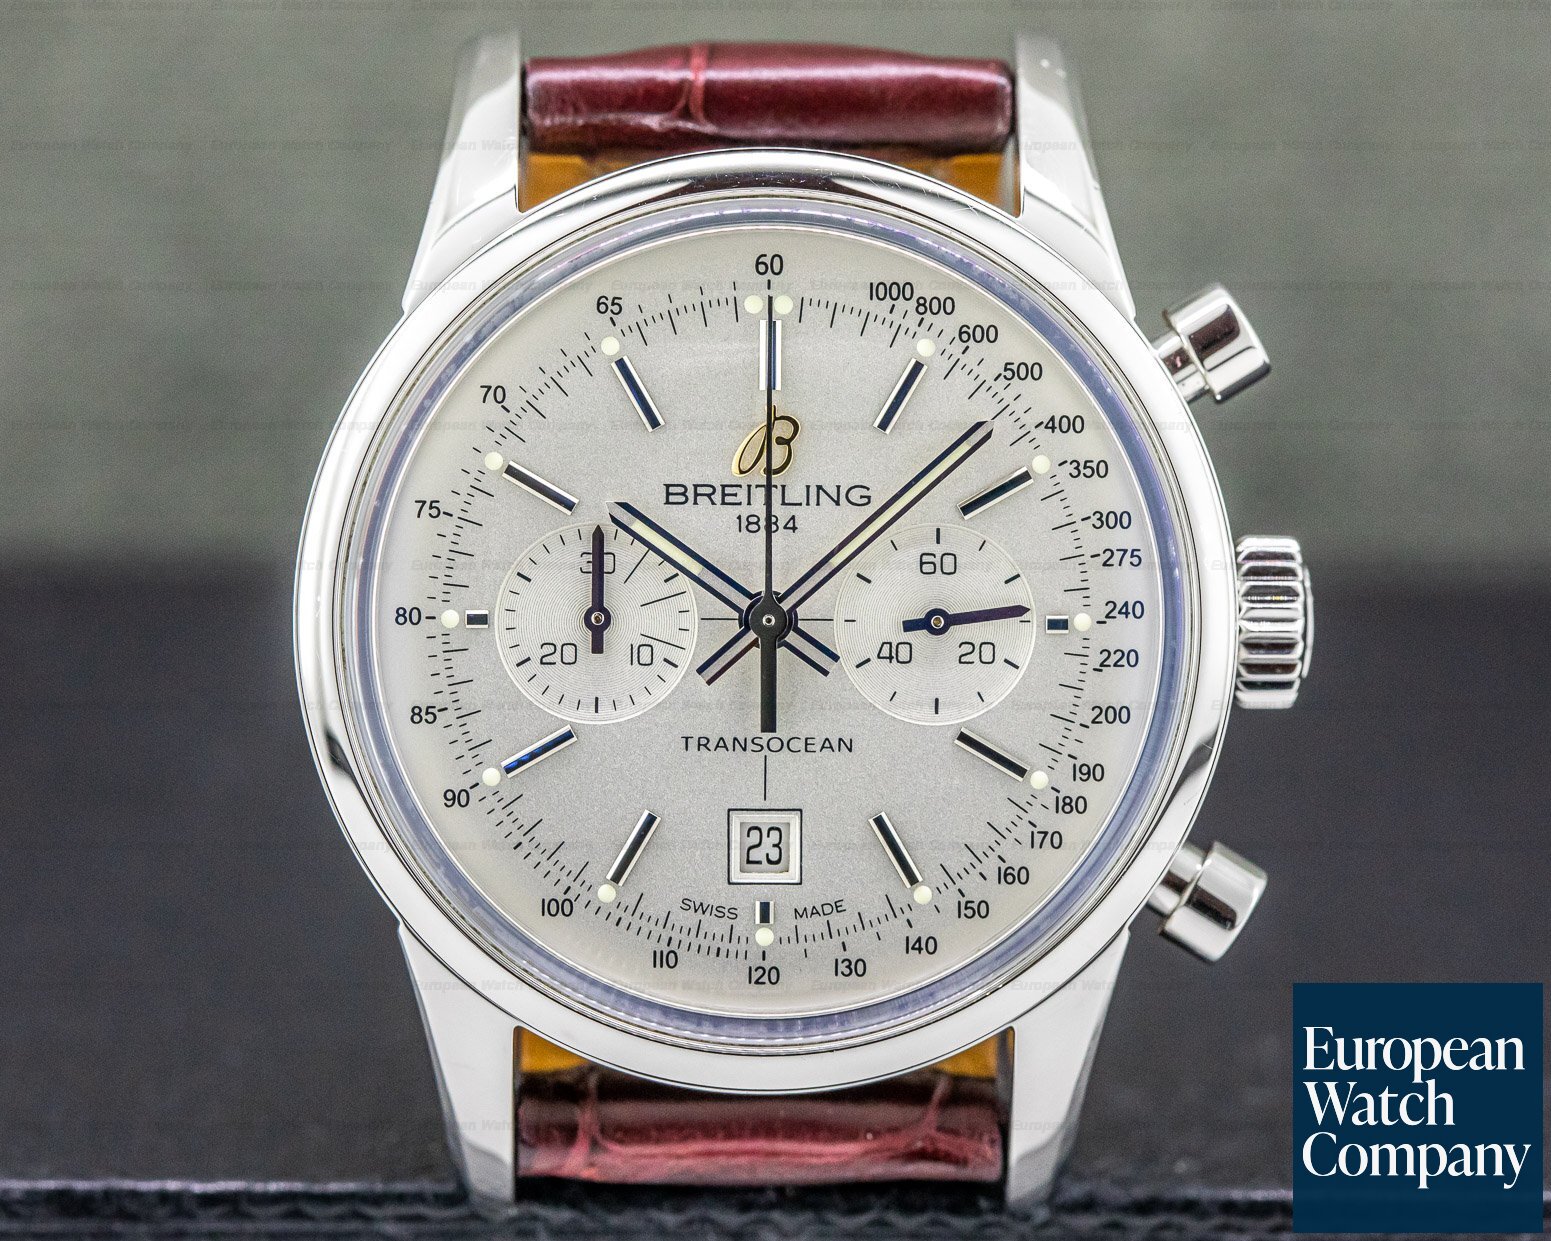 Breitling Transocean Chronograph Limited Edition for $5,698 for